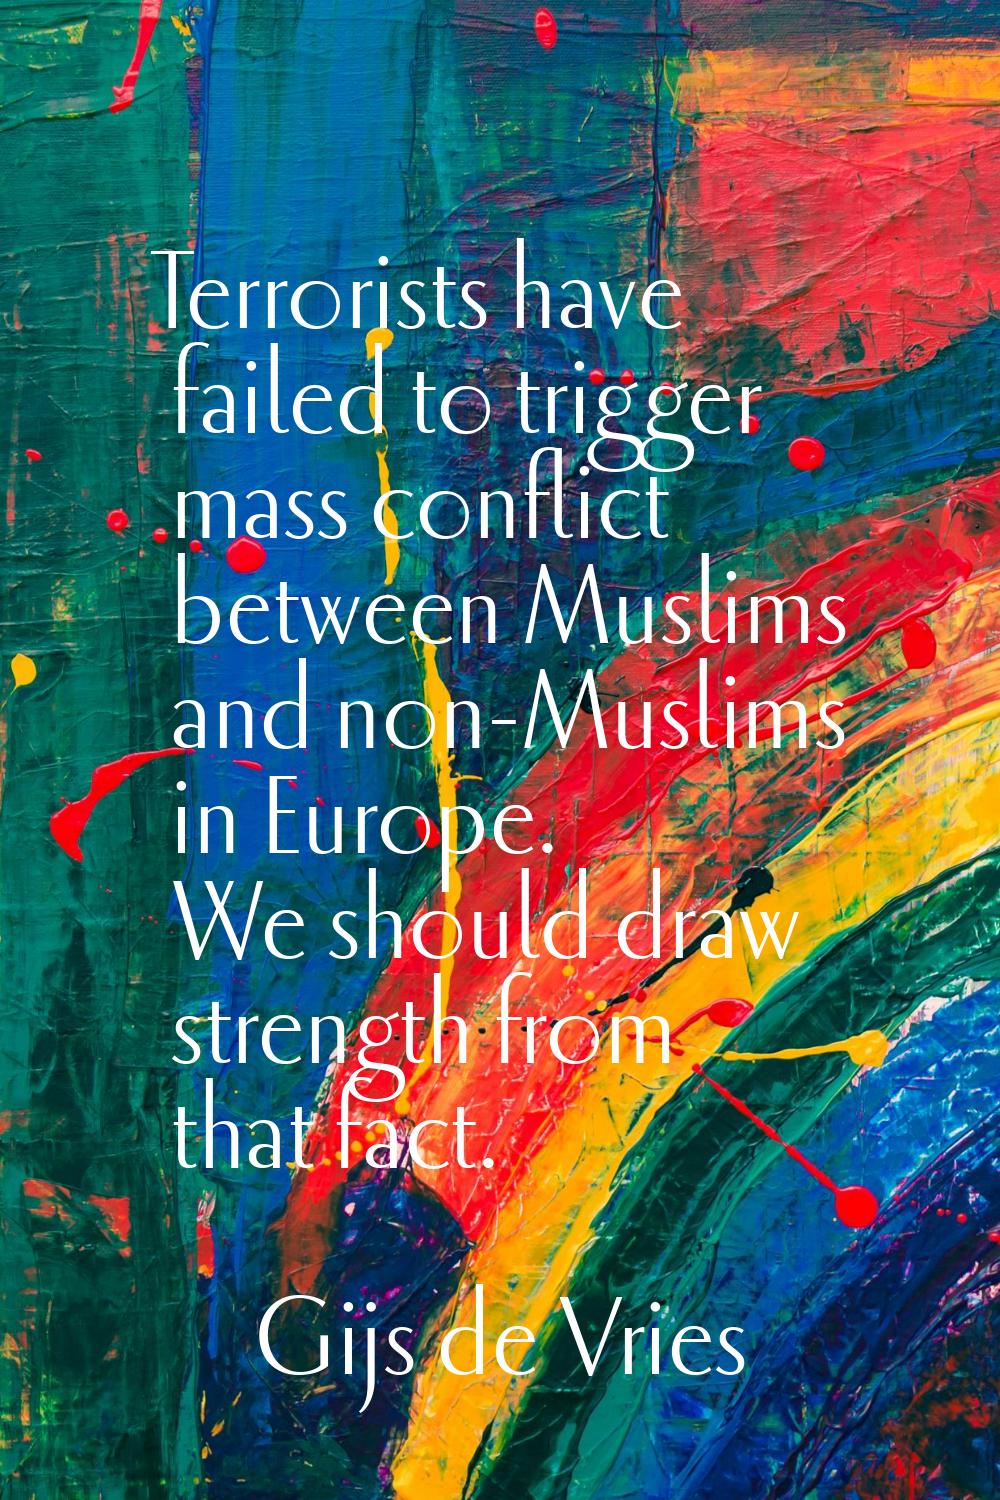 Terrorists have failed to trigger mass conflict between Muslims and non-Muslims in Europe. We shoul